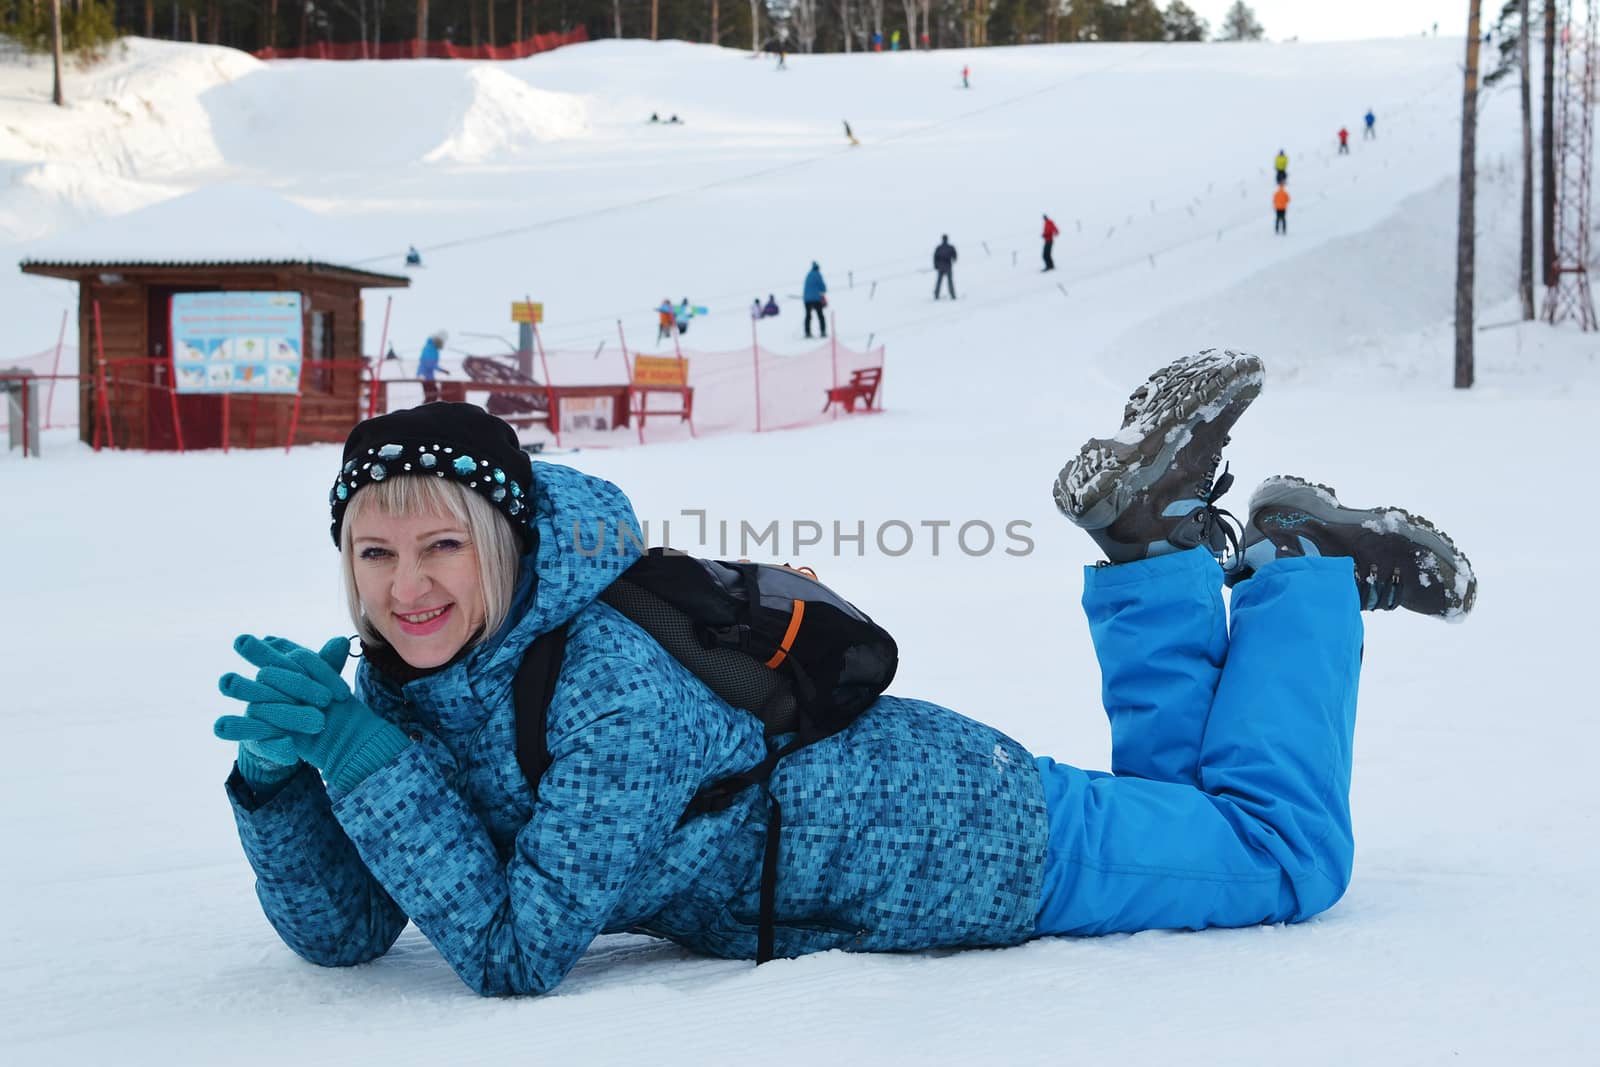 The woman in winter clothes lies on snow against the ski slope and smiles